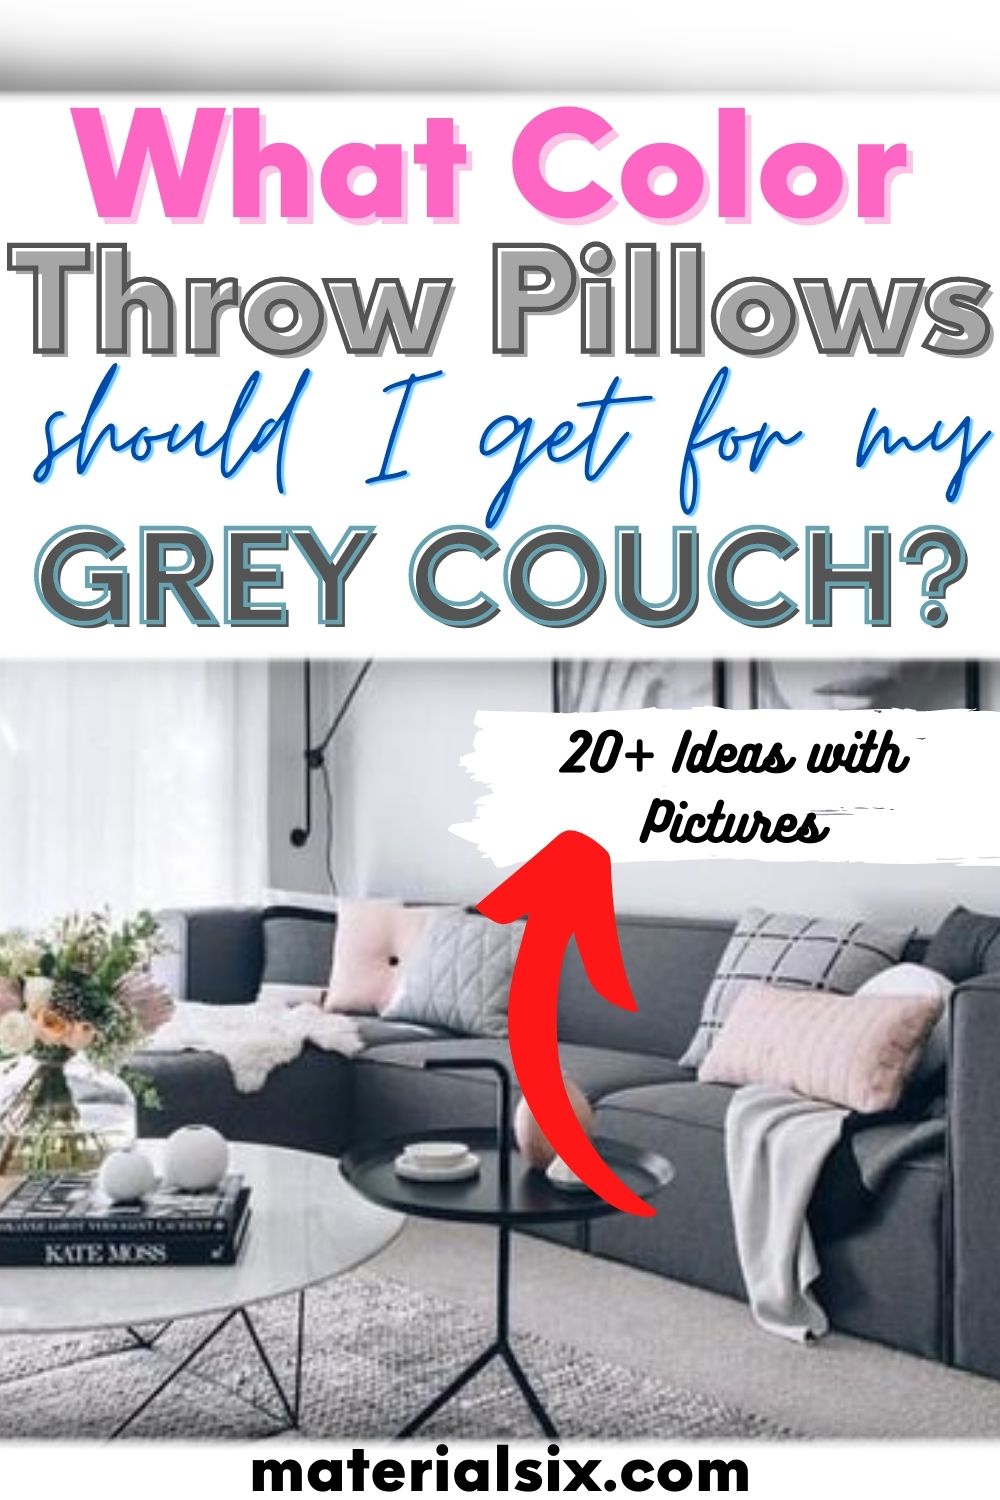 Which Throw Pillows Work Best With A Dark Gray Couch?